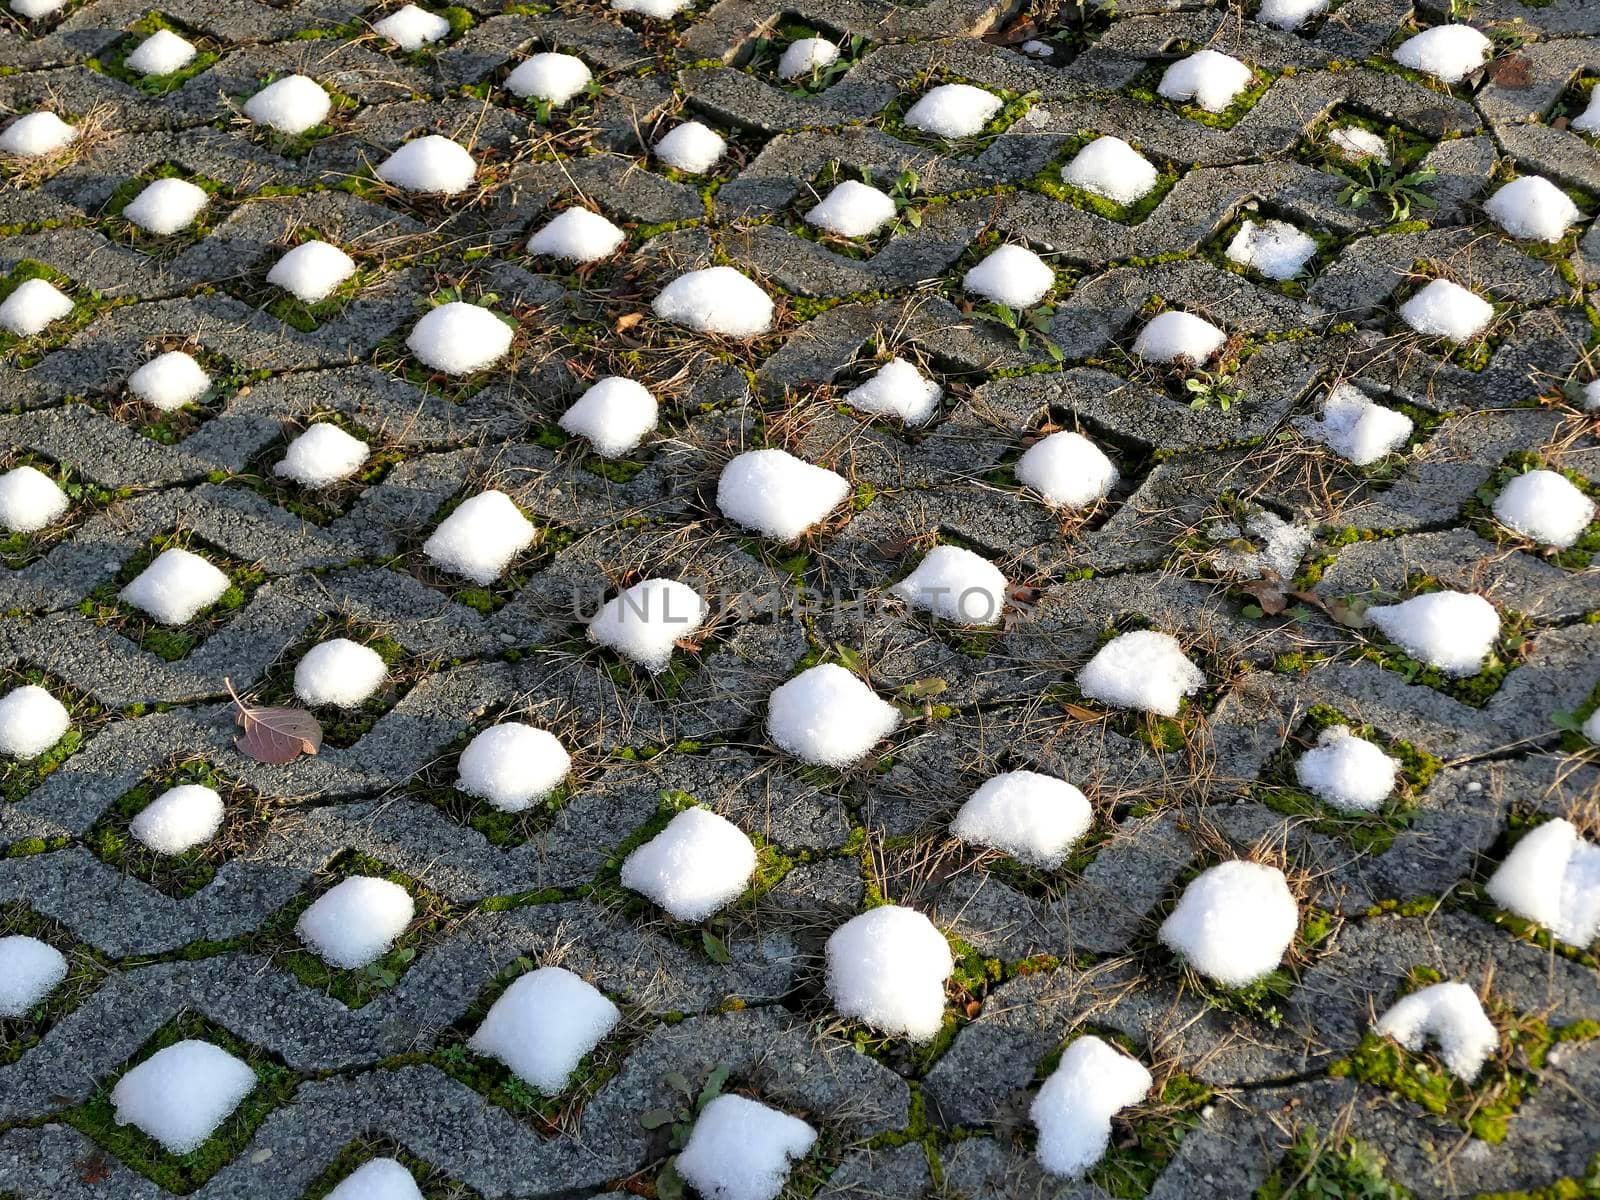 snow caps on grass pavers in winter in Germany by Jochen